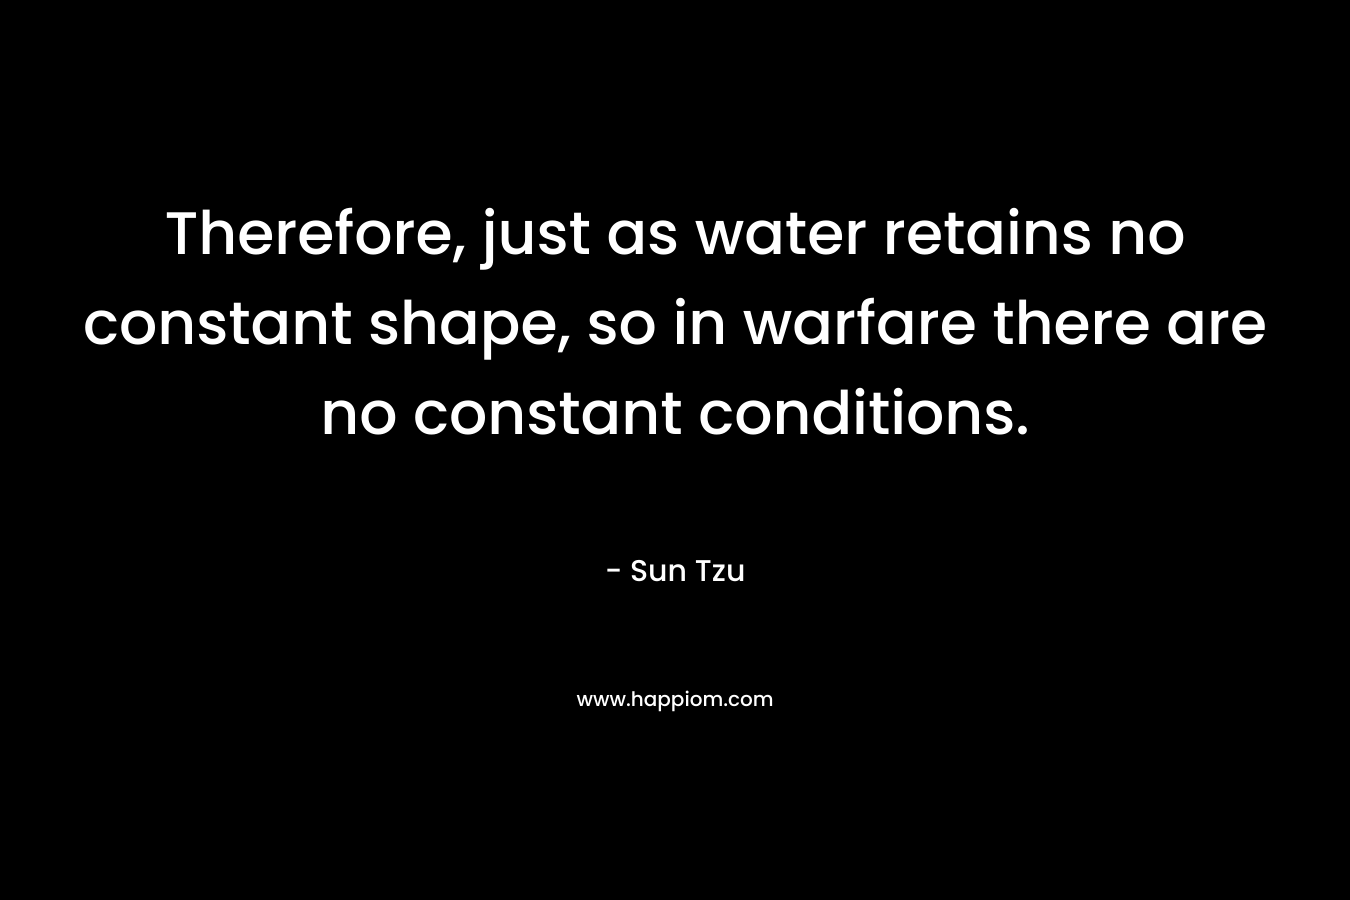 Therefore, just as water retains no constant shape, so in warfare there are no constant conditions.